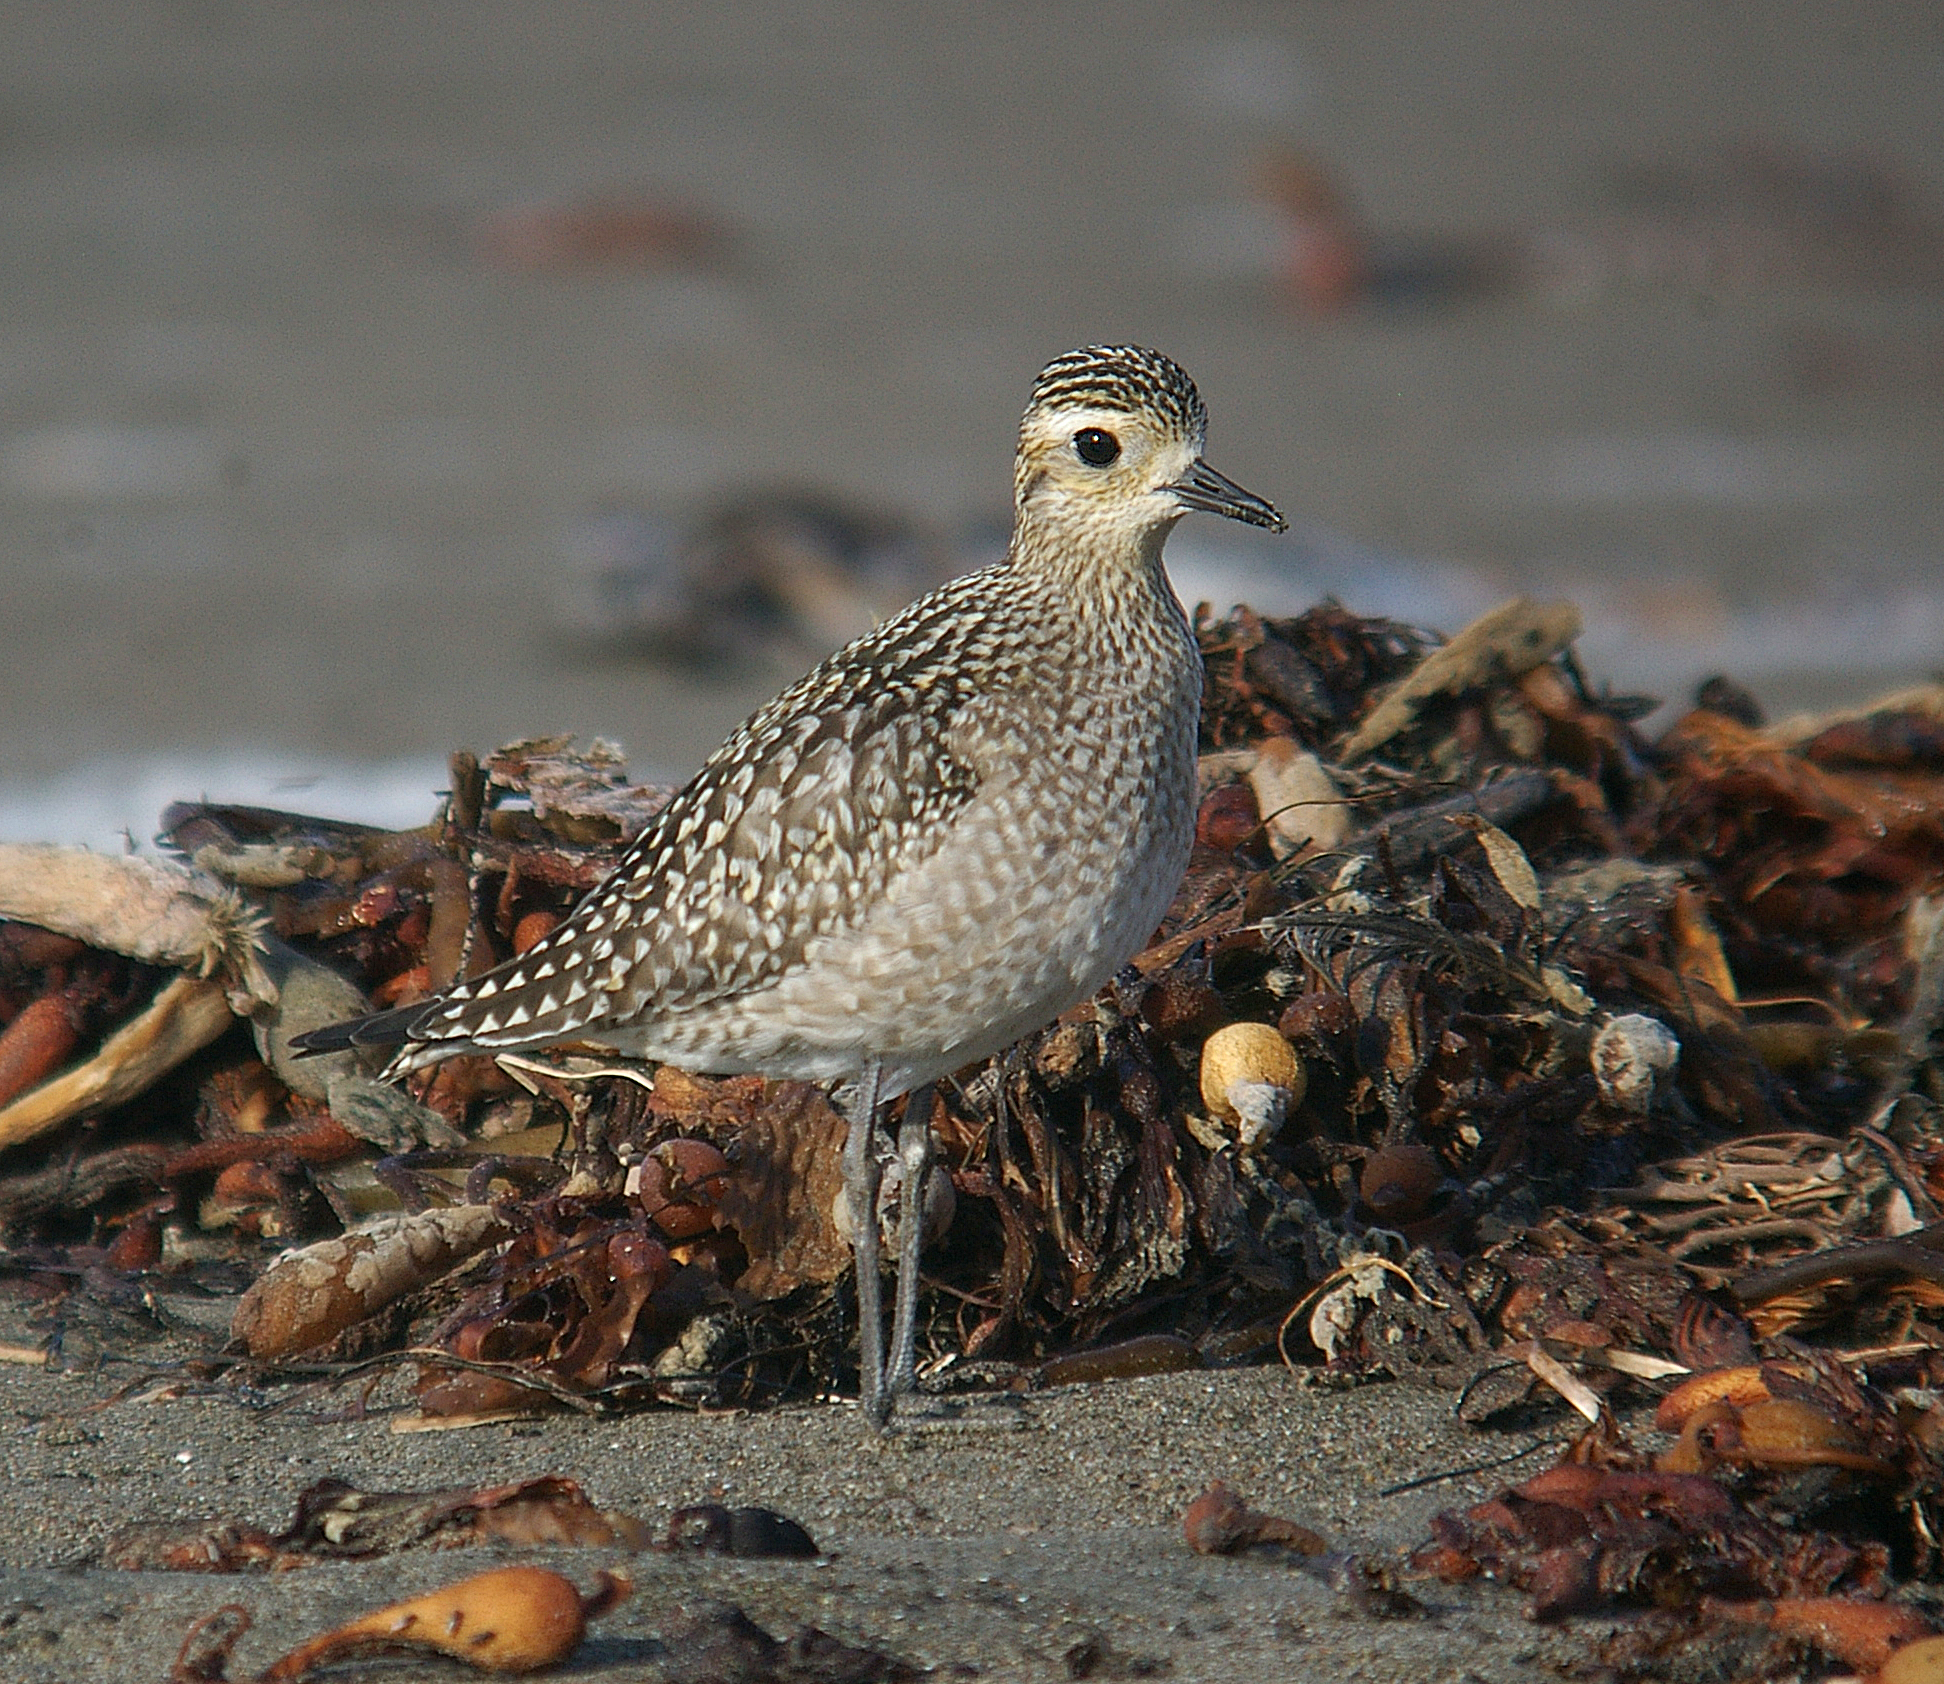 American golden plover (Pluvialis dominica) sighted at Richard St. Barbe Baker spring 2019